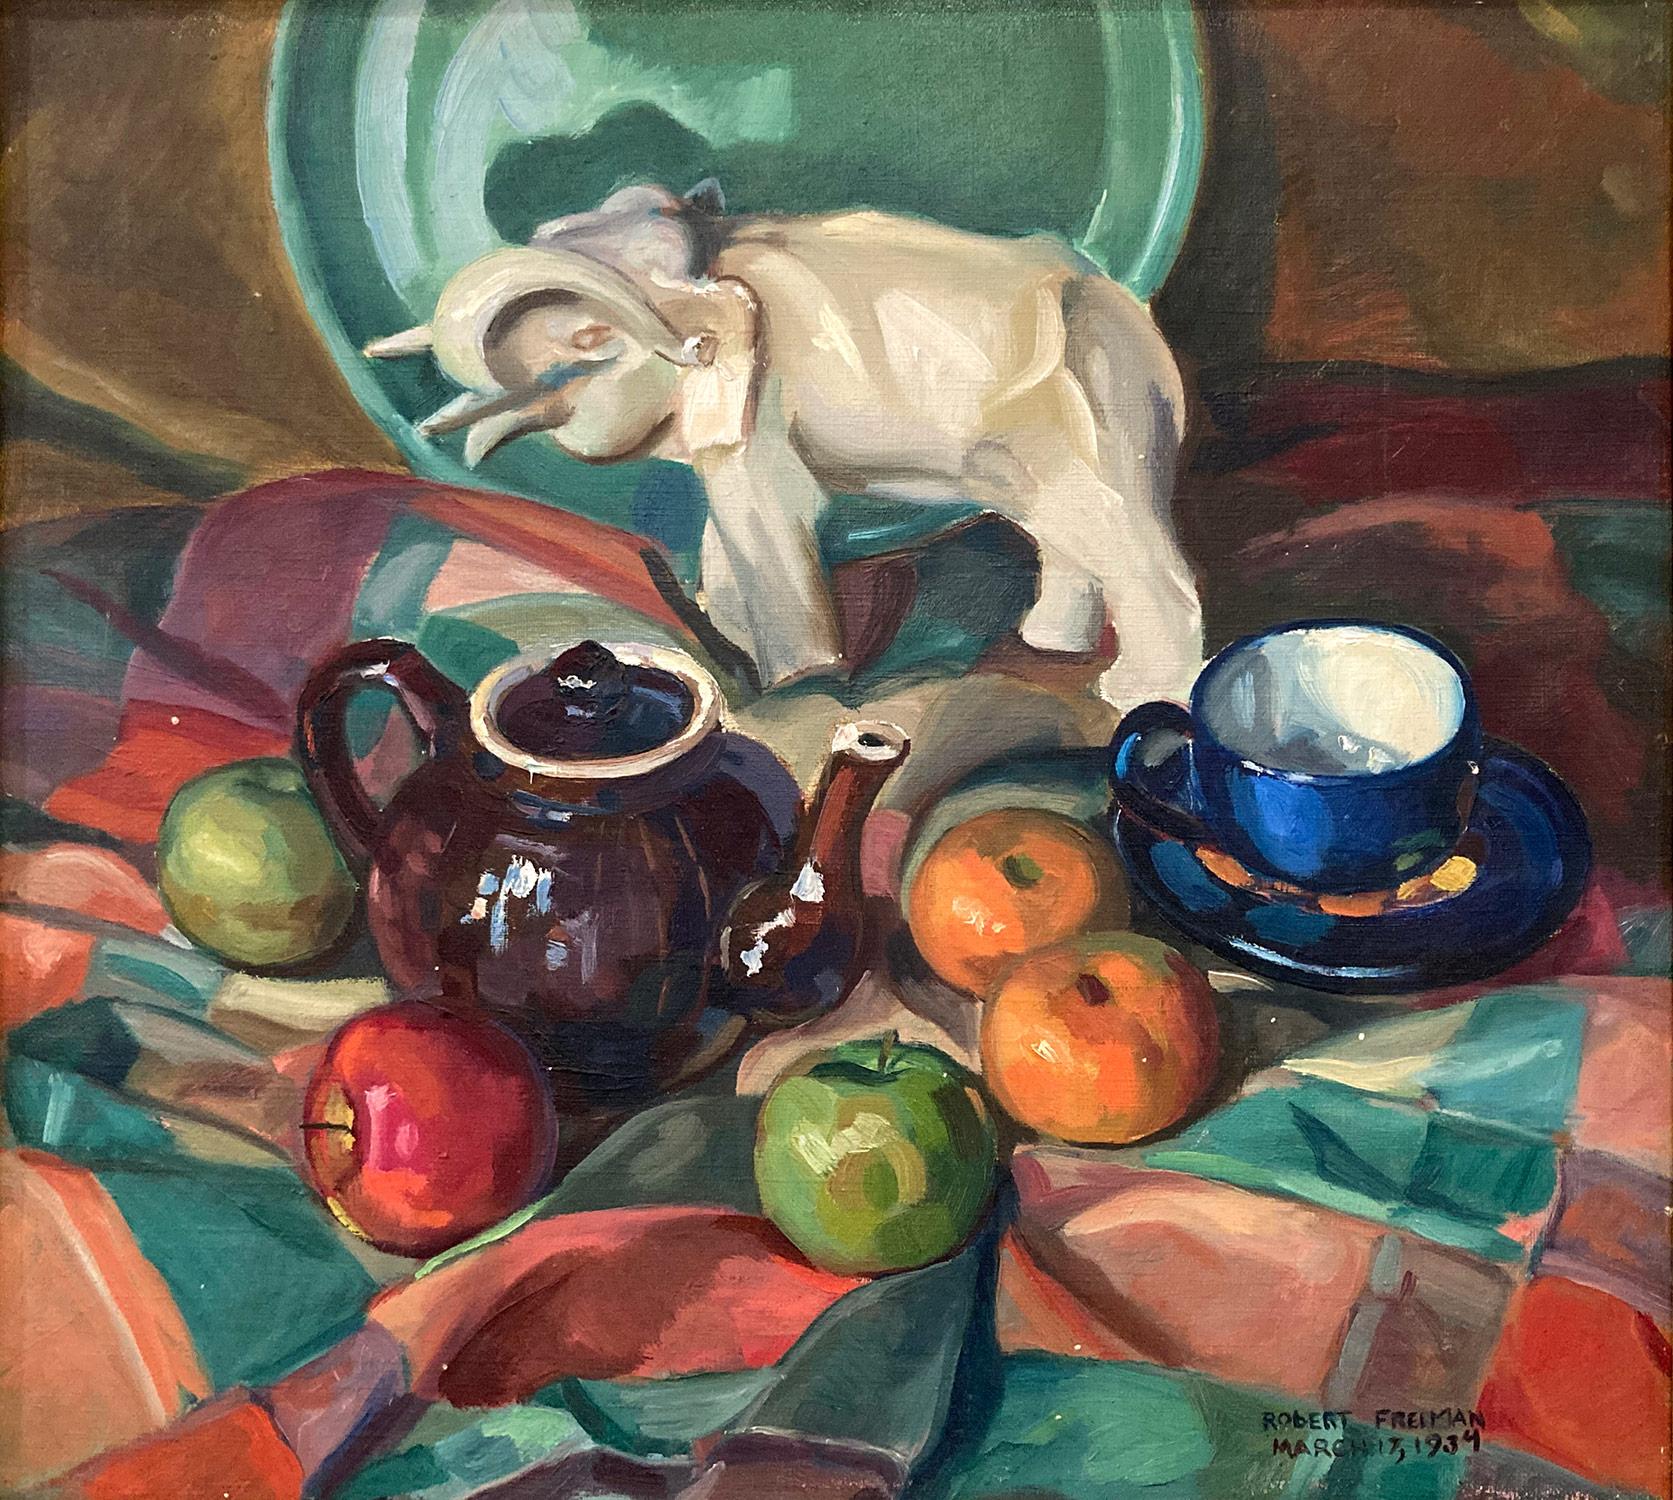 American 20th Century Oil Painting Still Life of Fruits & Tea Set from 1934 - Black Figurative Painting by Robert Freiman